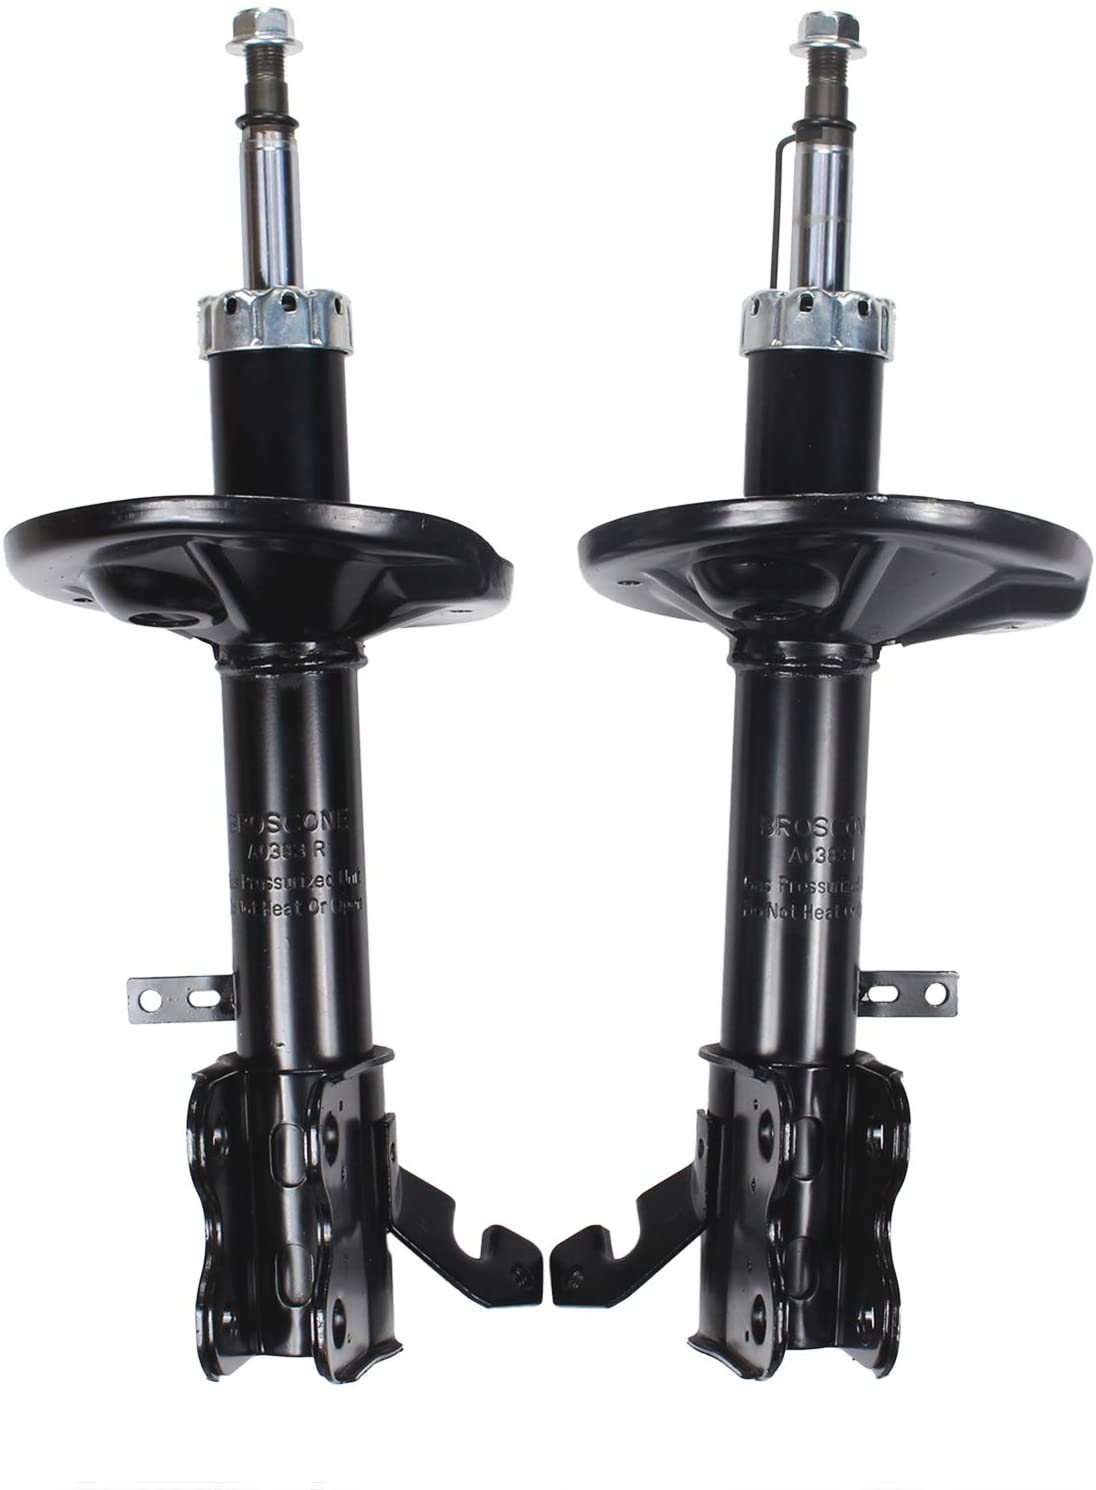 ASL 2pcs Front Compatible with 98-02 Chevy Prizm 93-97 Geo Prizm 93-02 Corolla Gas Suspension Absorber Struts Shock Assembly